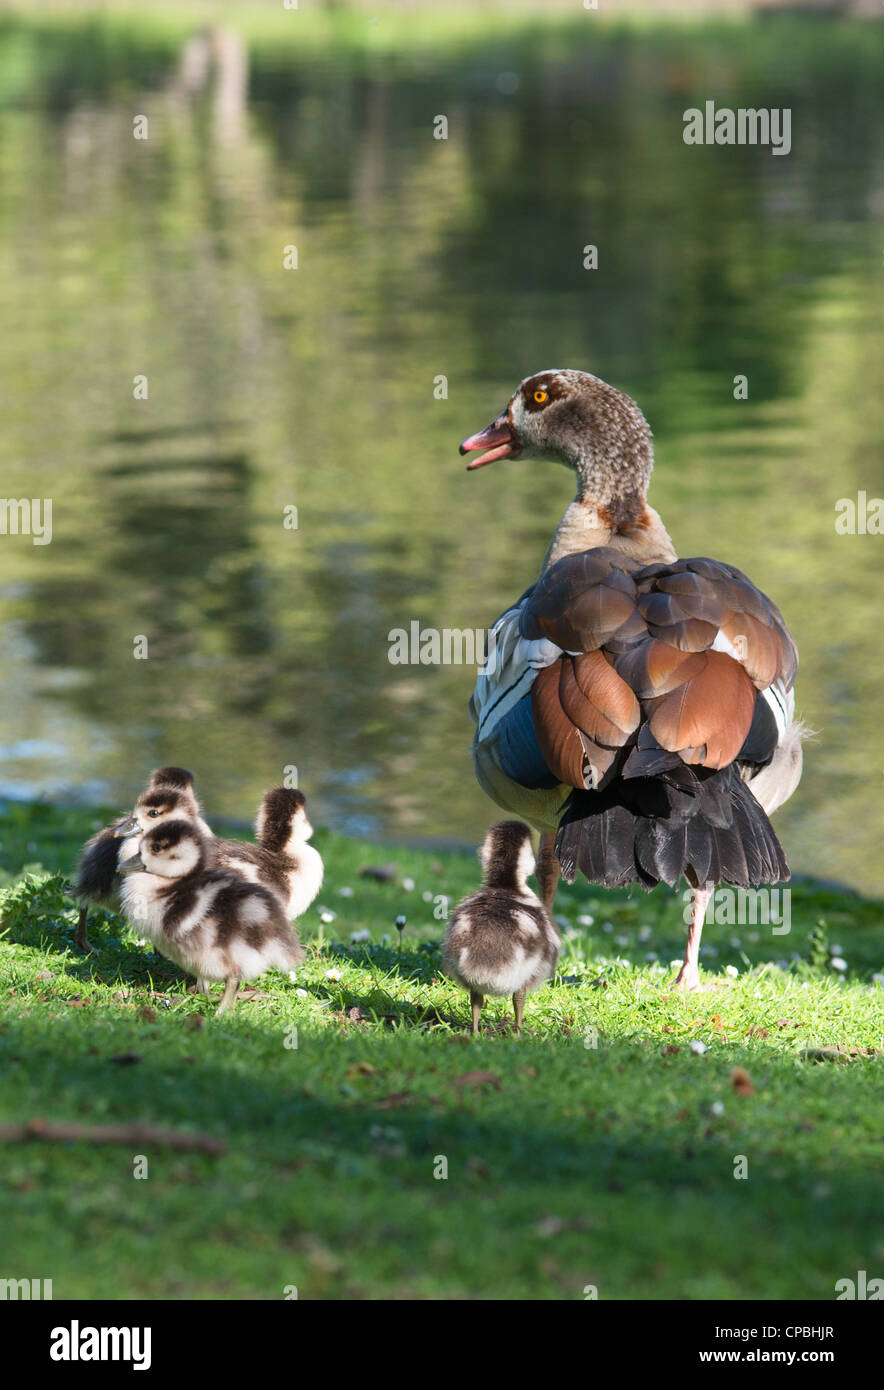 Egyptian Goose (Alopochen aegyptiacus) with chicks at St James park pond. London. England. Stock Photo